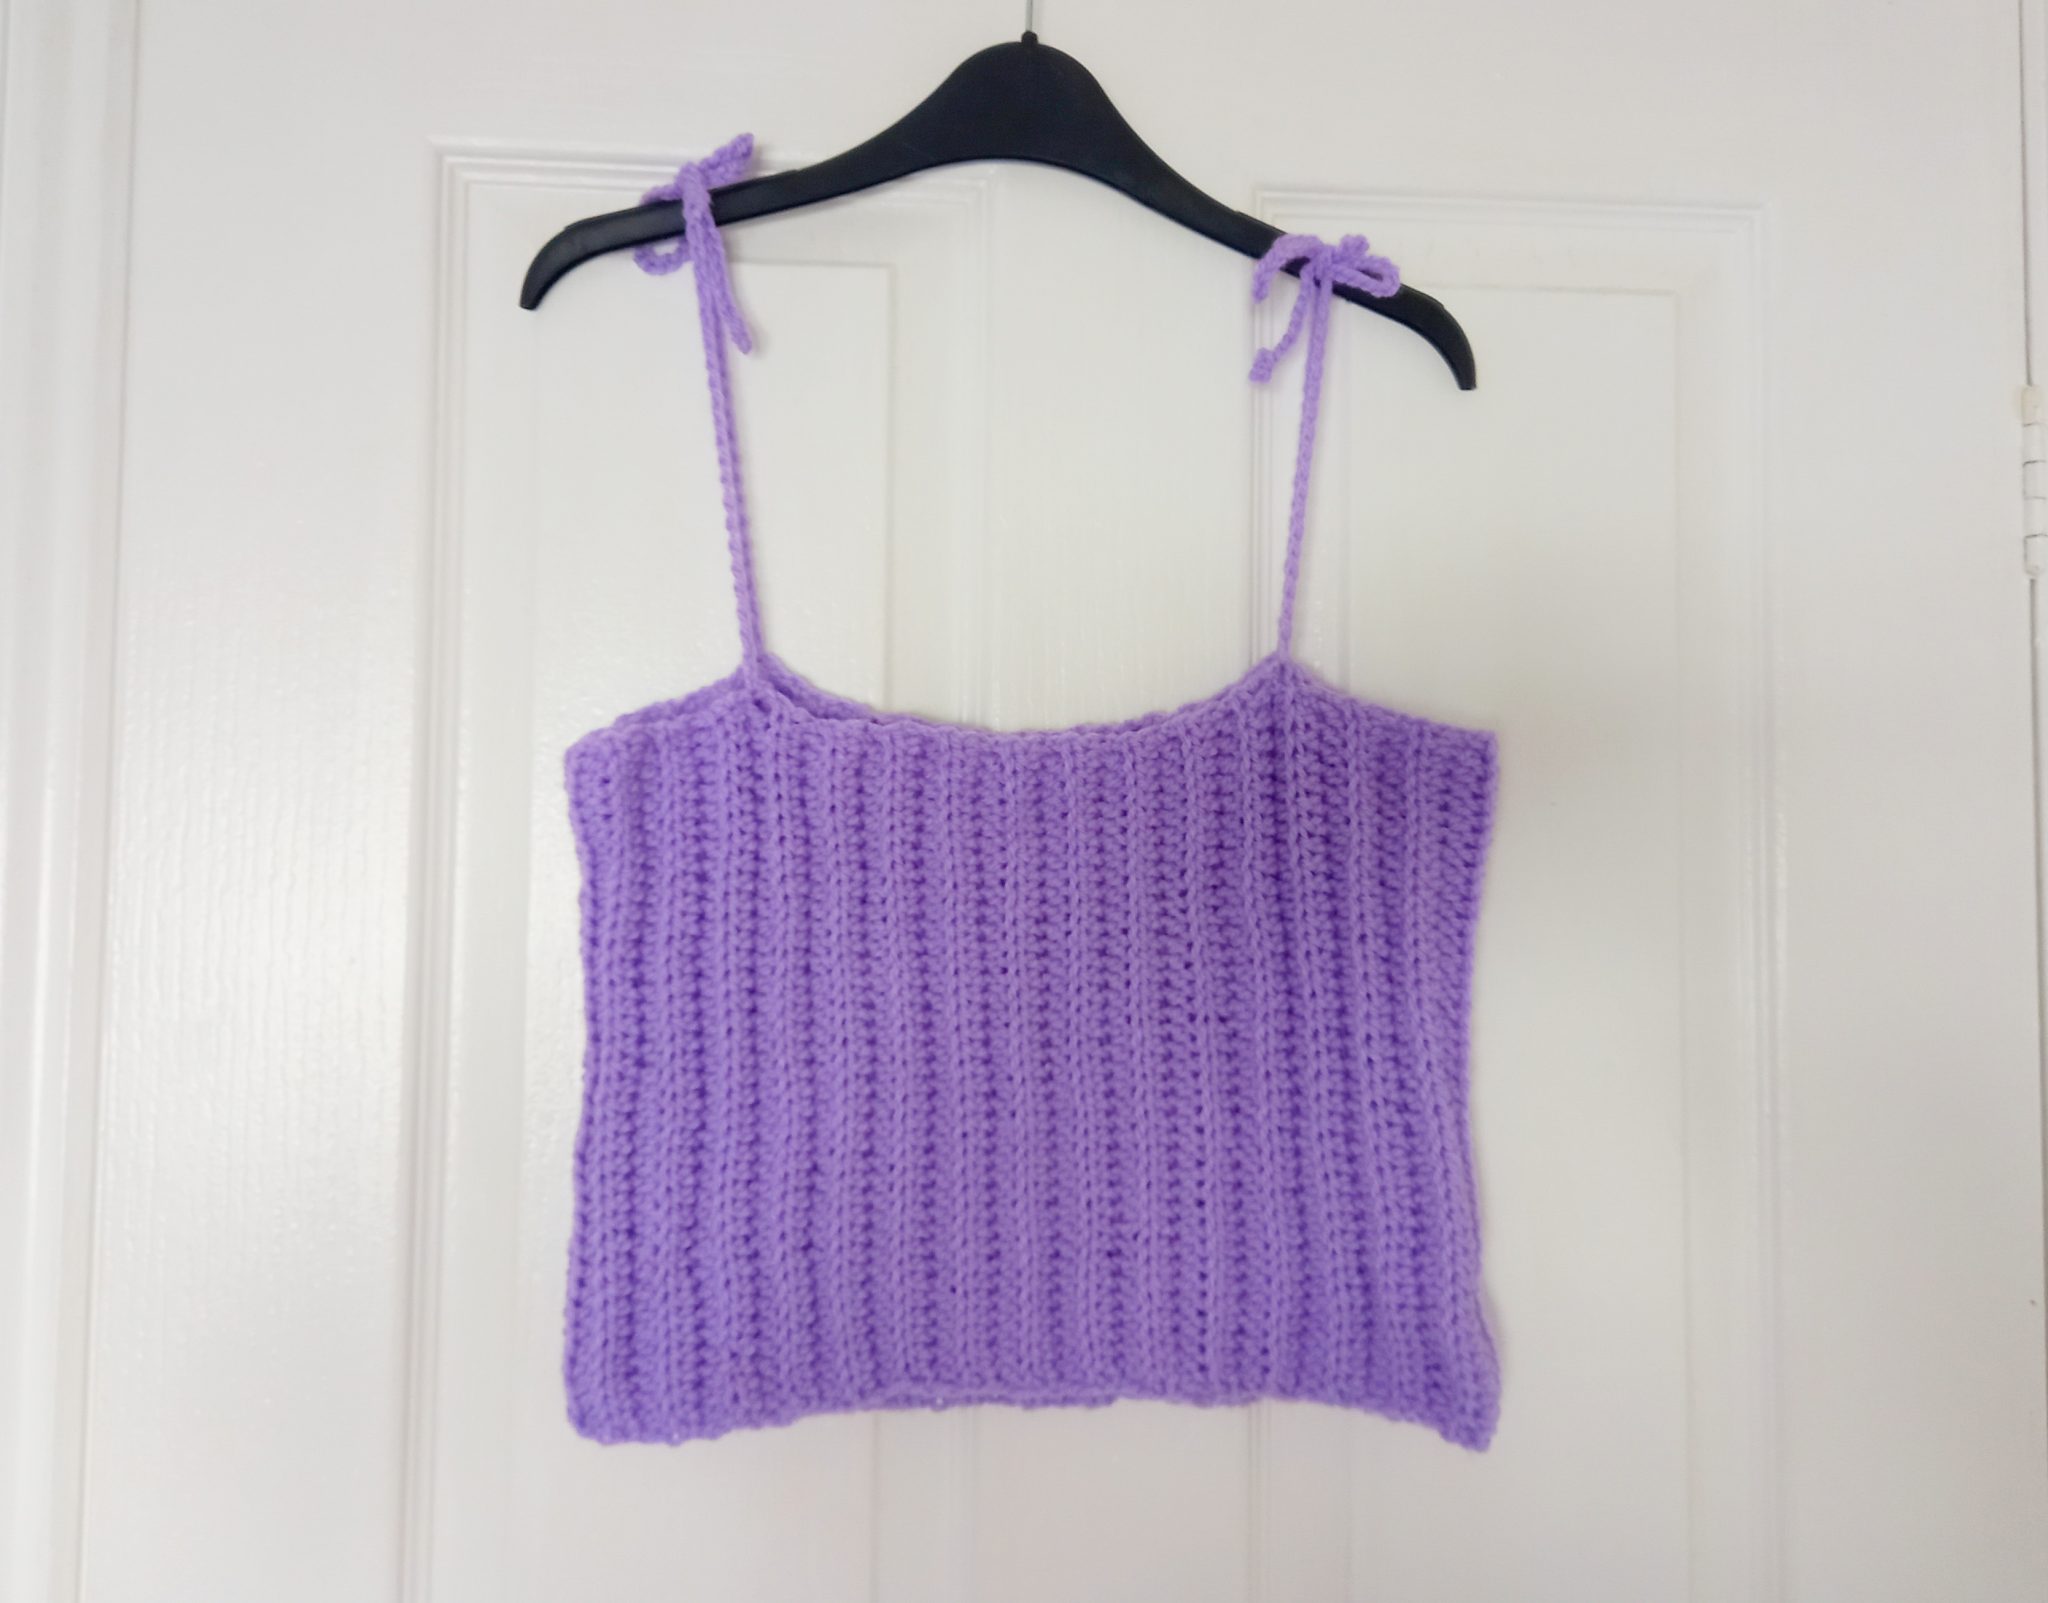 Crochet The Lilac Summer Top by Selina Veronique Crochet